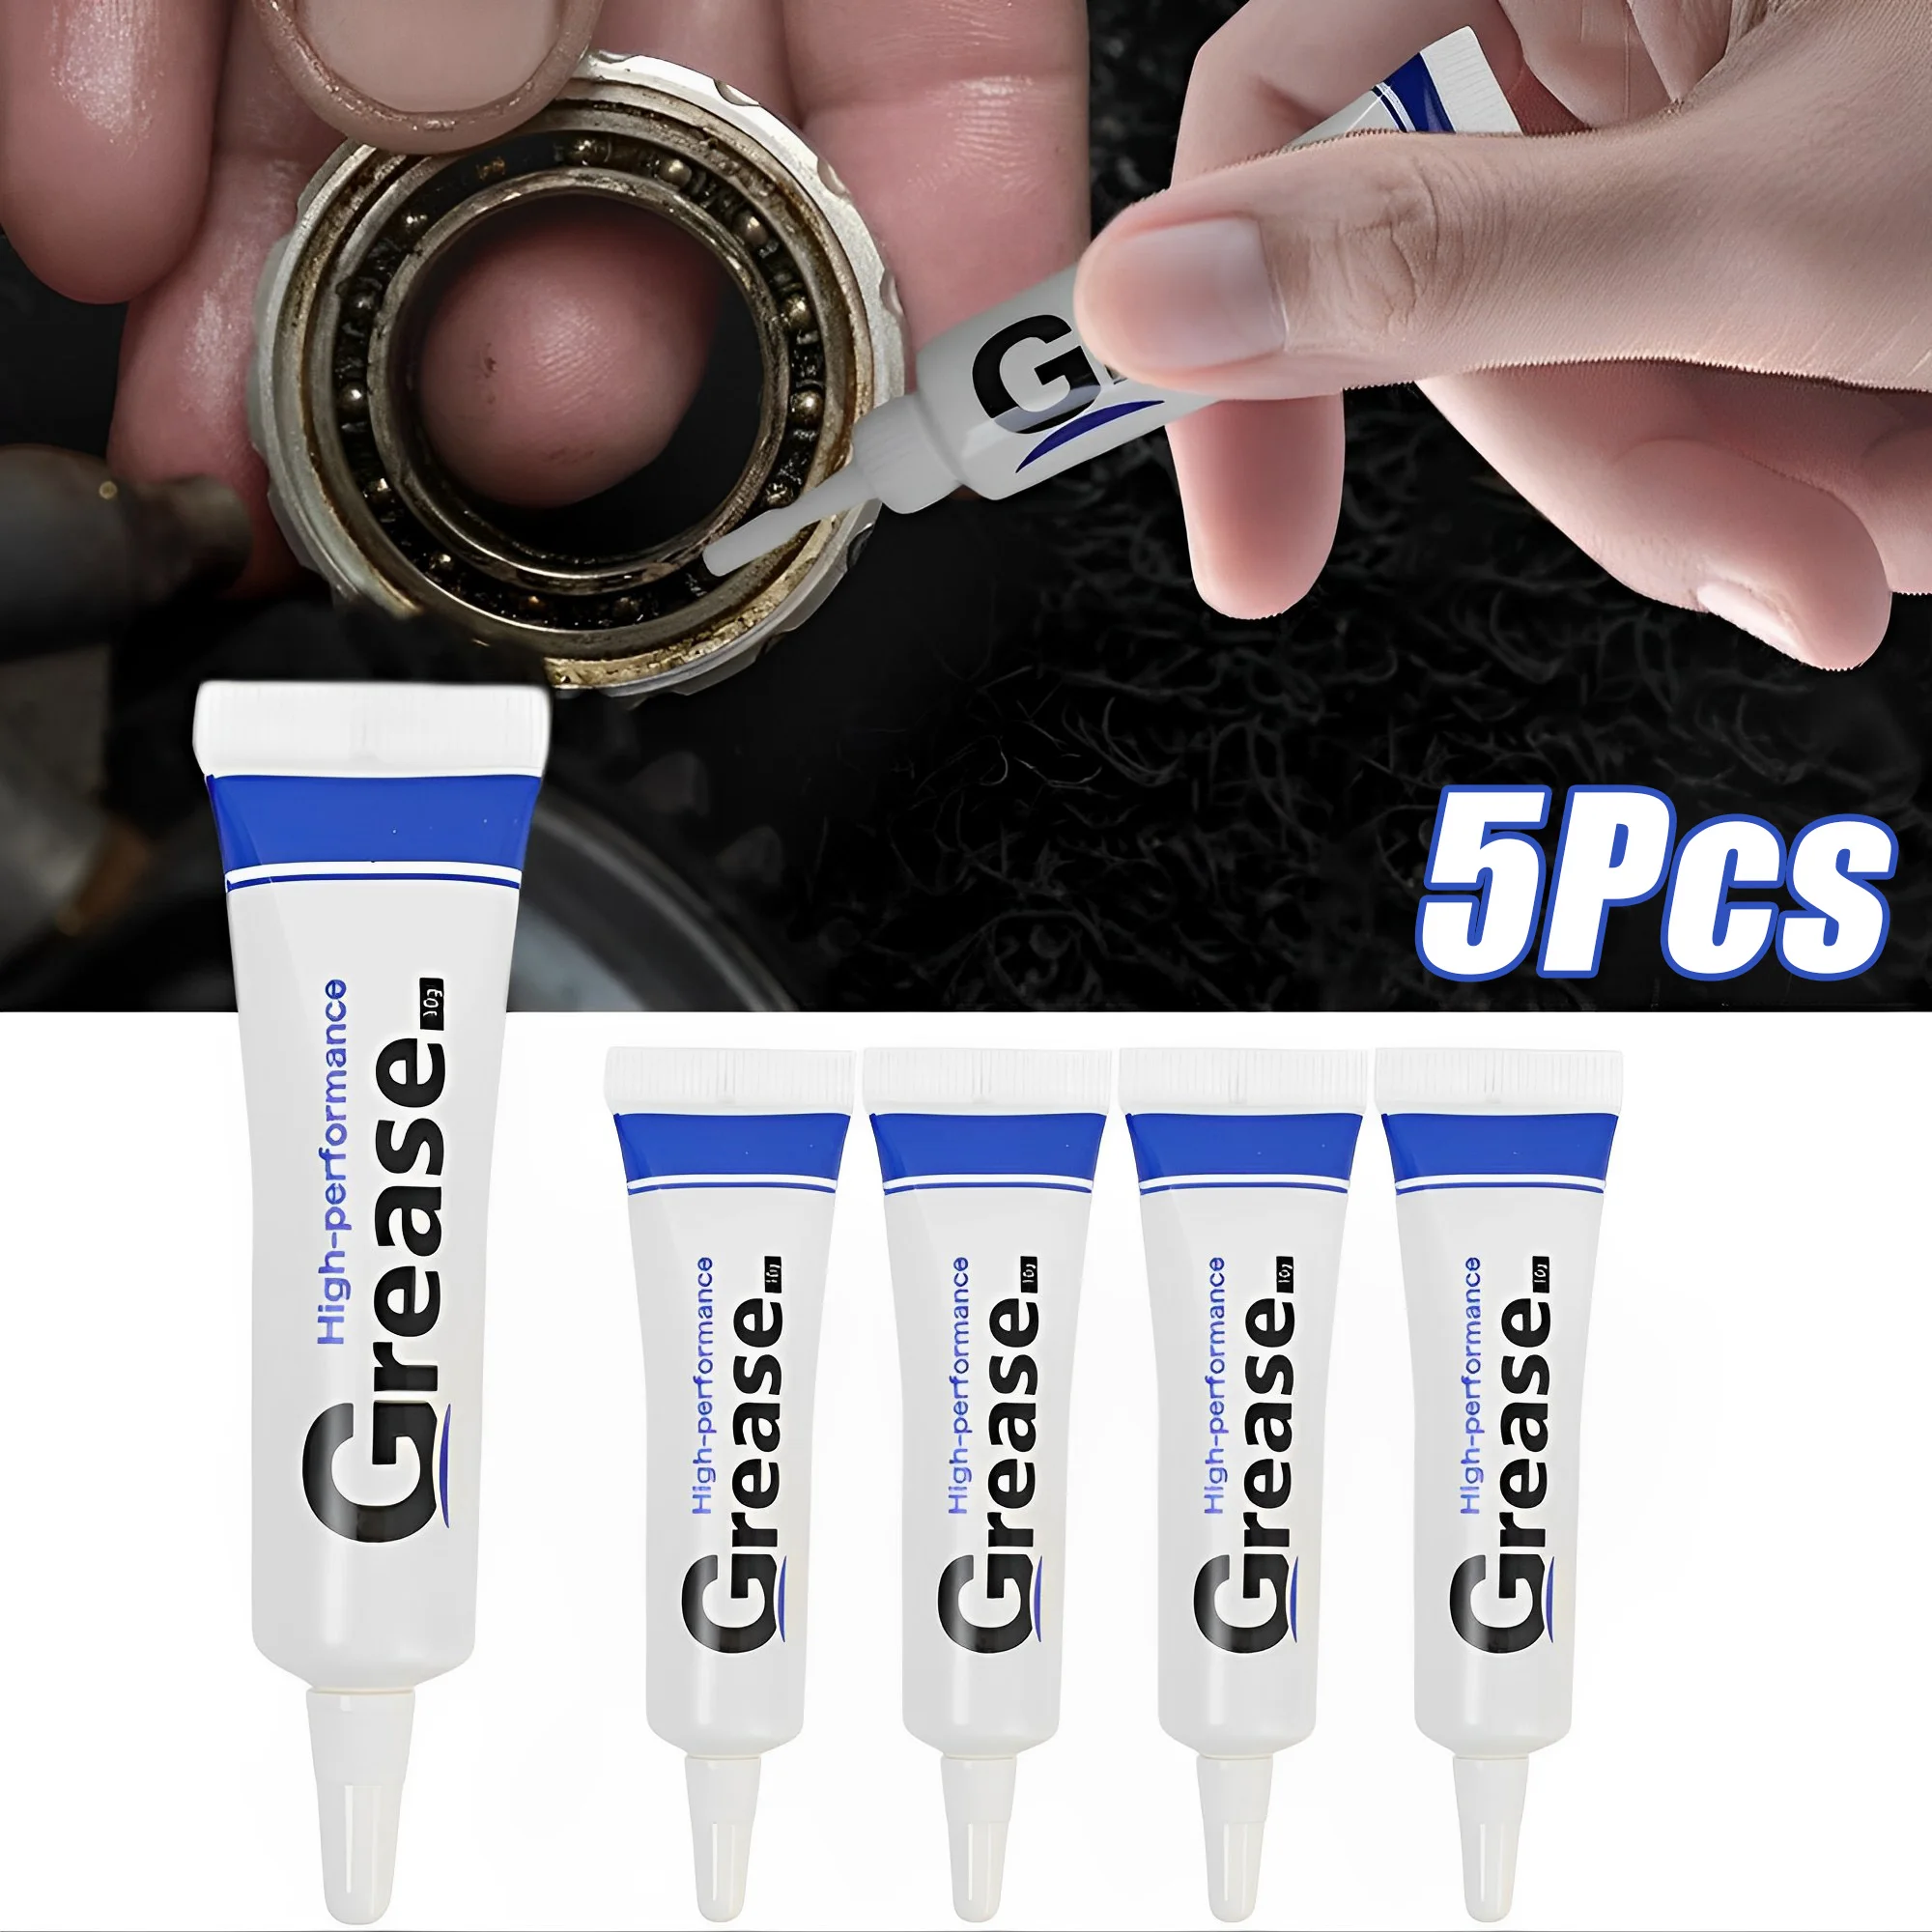 

5Pcs Multipurpose Silicone Lubricant Grease Oil Bearing Lubrication Waterproof Car Gear Valves Chain Repair Lithium Grease Tools